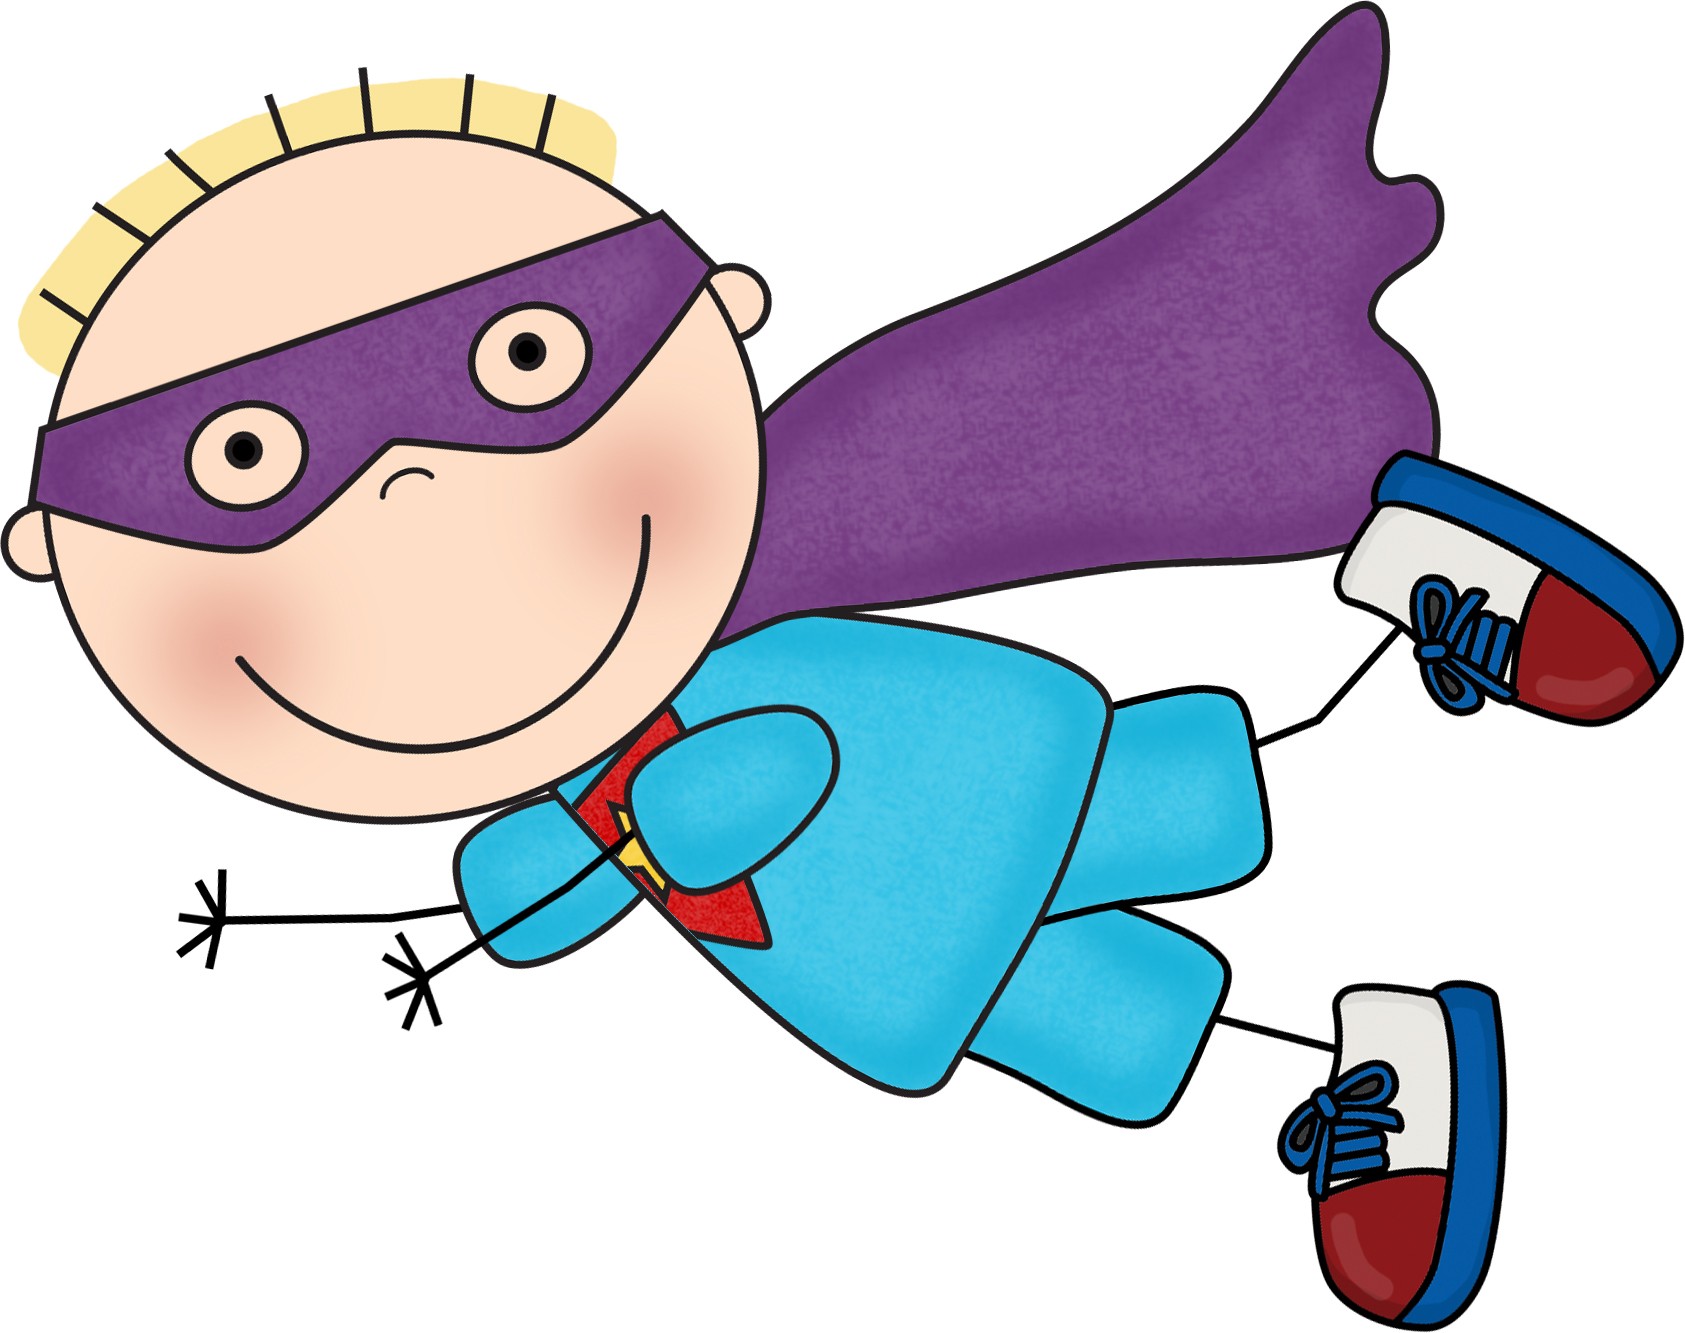 Super Hero Clip Art is high definition wallpaper. You can make Super Hero Clip Art For your Desktop Background, Tablet, and Smartphone device for free.